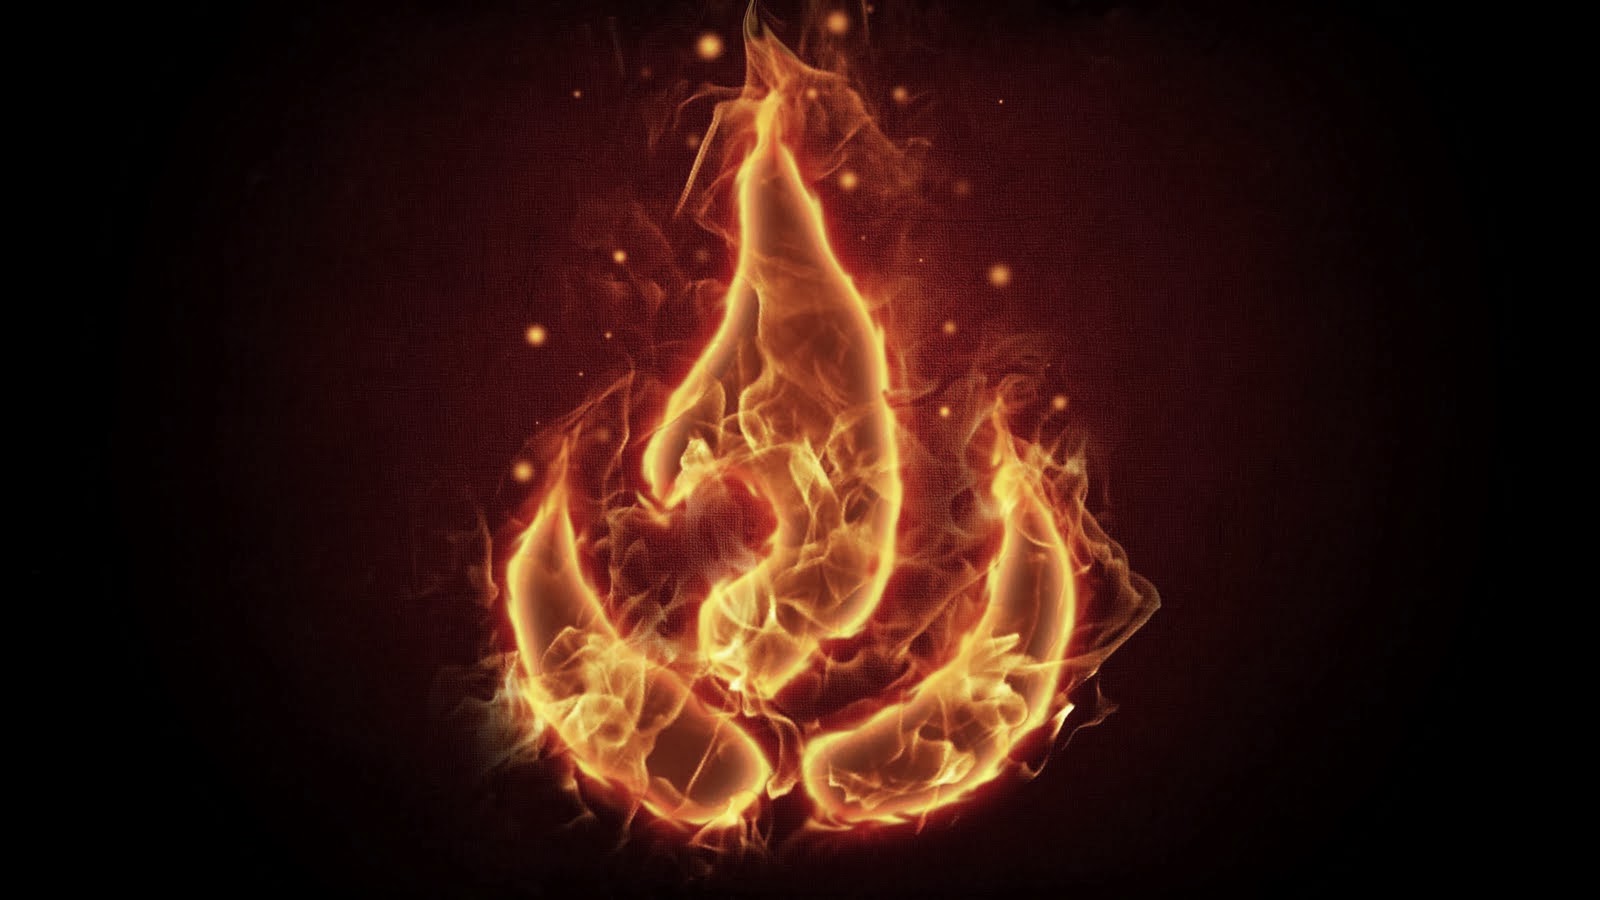 Cool Flame Backgrounds (72+ images)